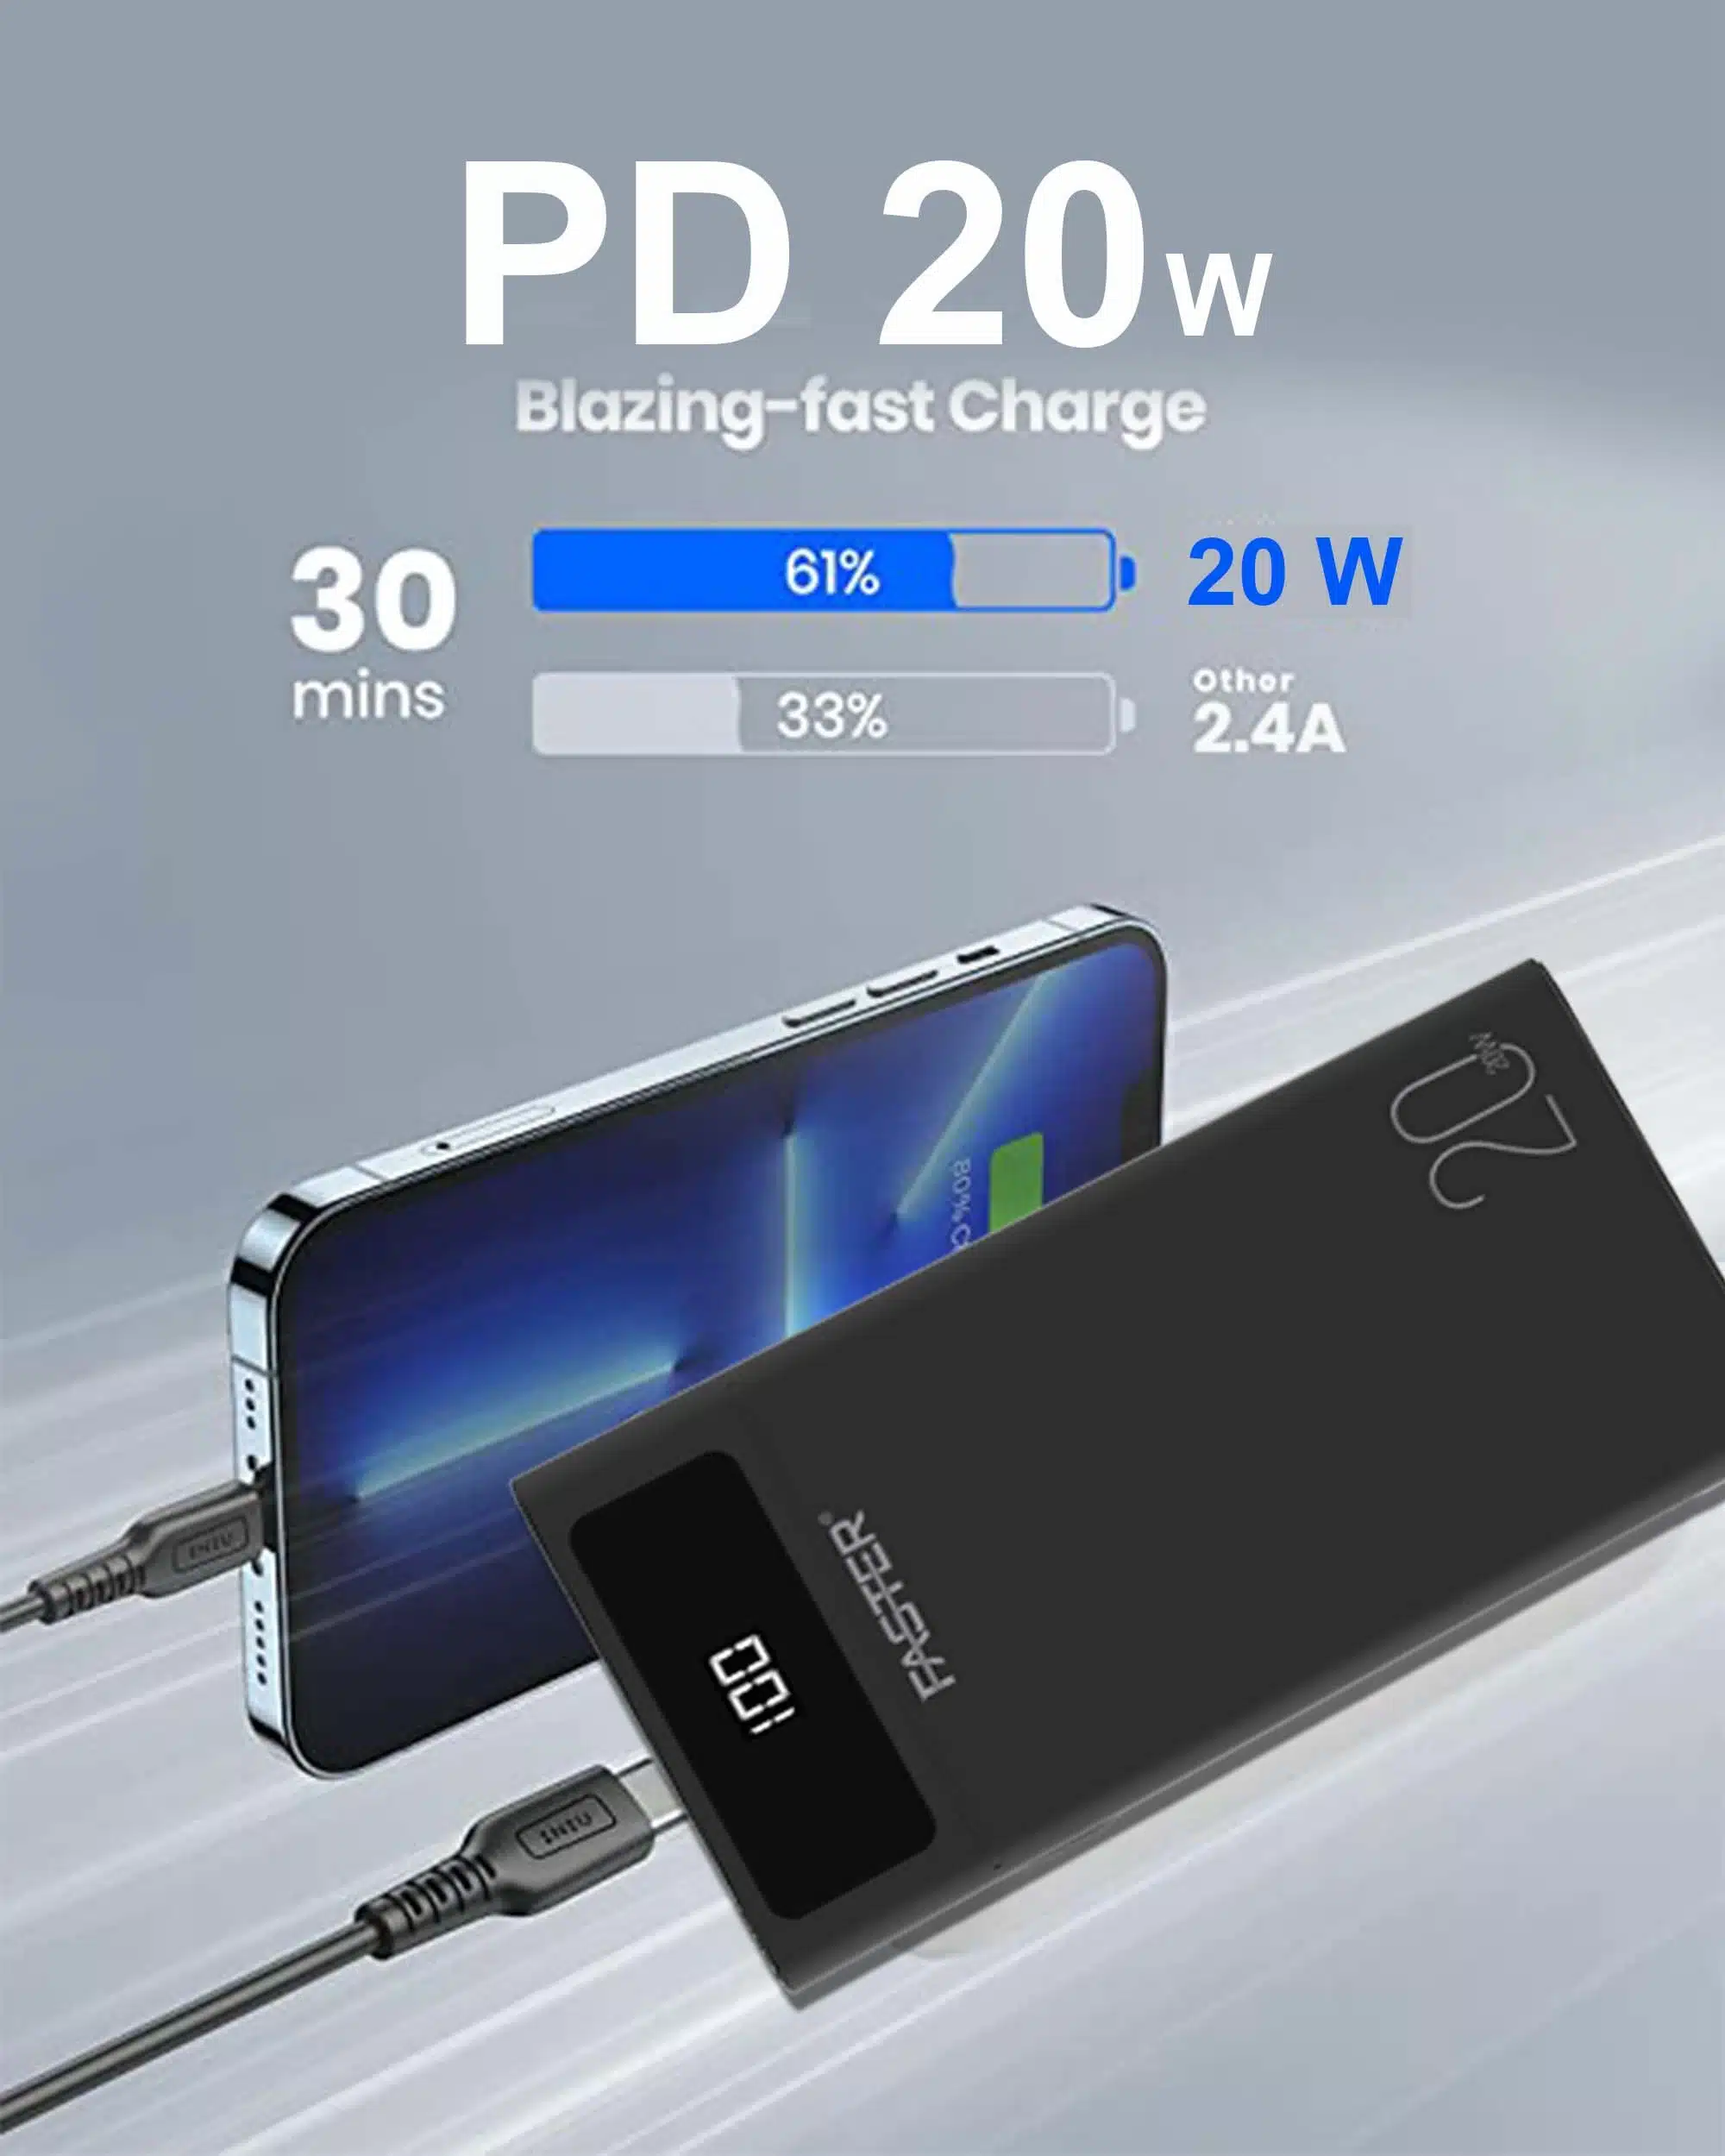 FASTER- S20- PD-20W -Qualcomm- Quick -Charge- 3.0- Power- Bank -20000- mAh- with- Digital- Display